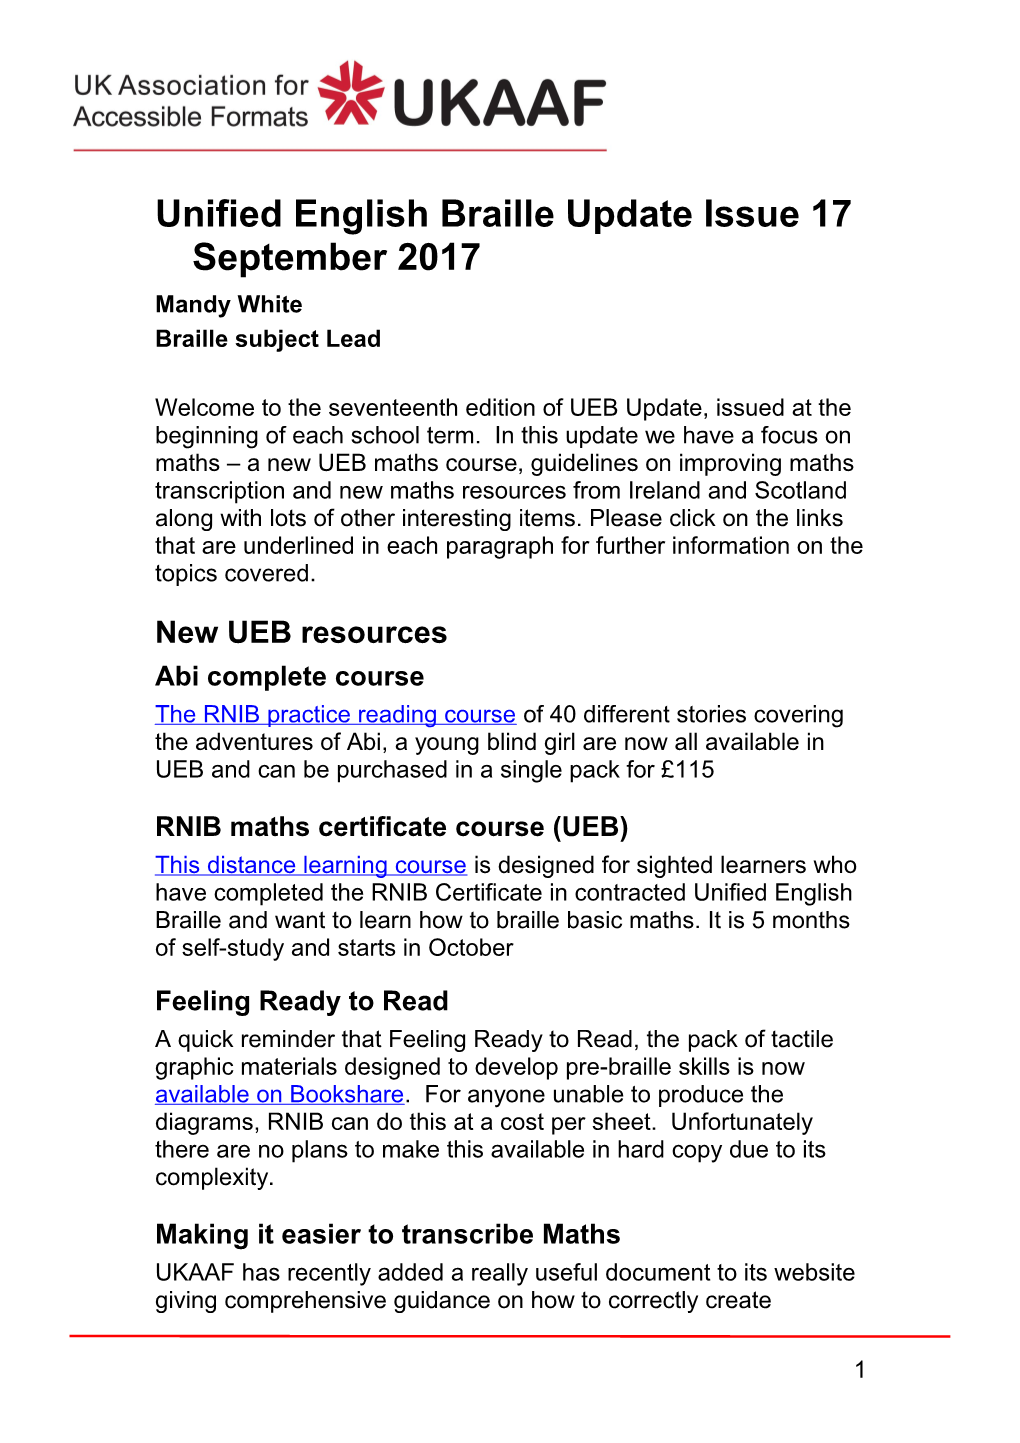 Unified English Braille Update Issue 17 September2017